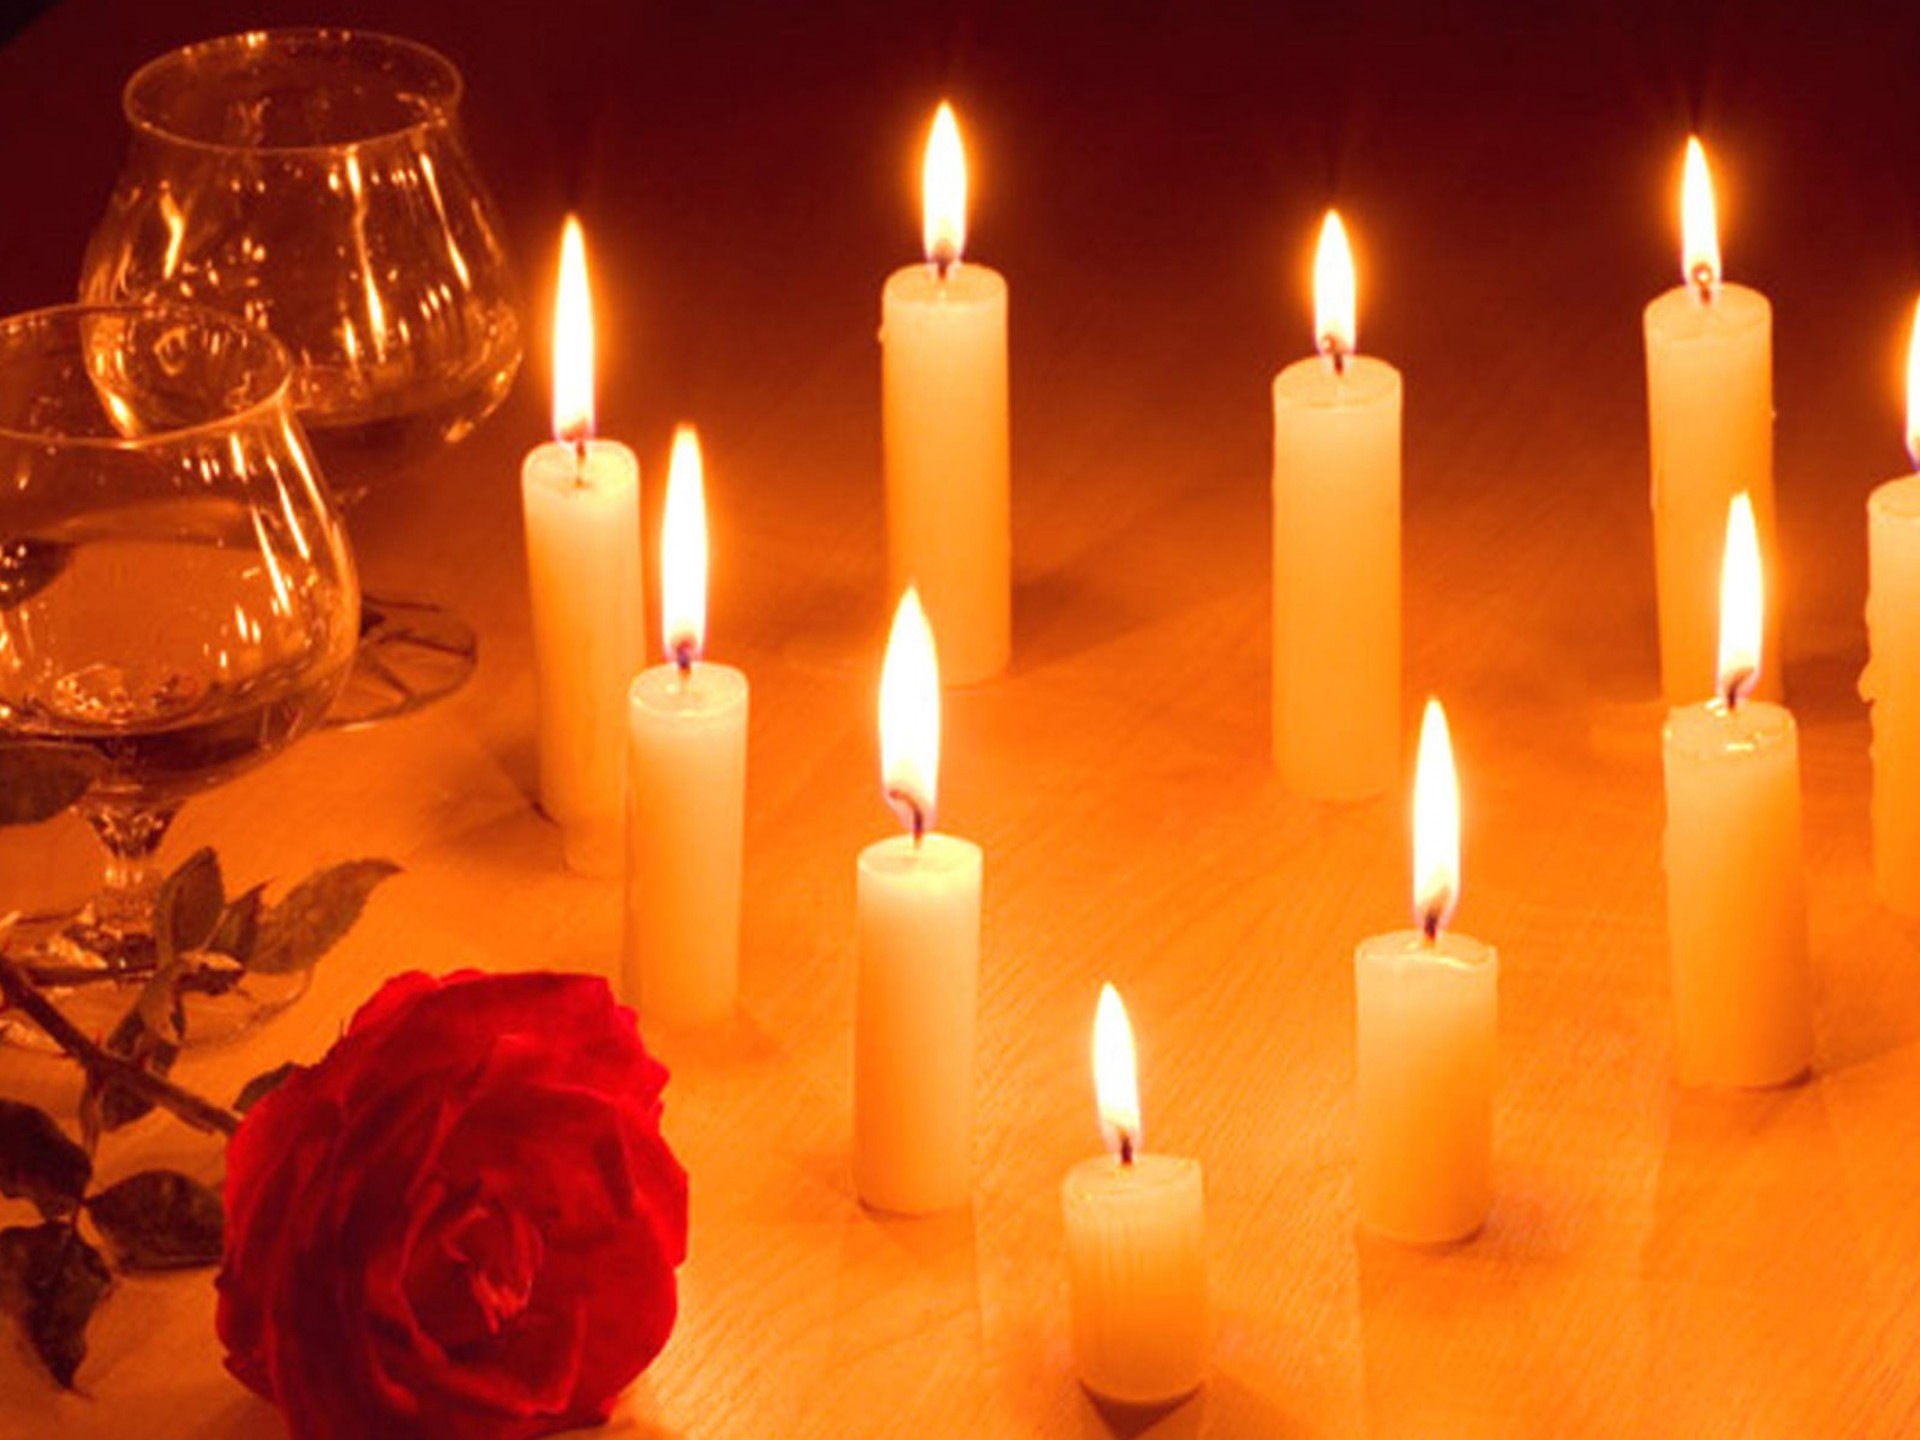 Candle Light Wallpaper (60+ images)